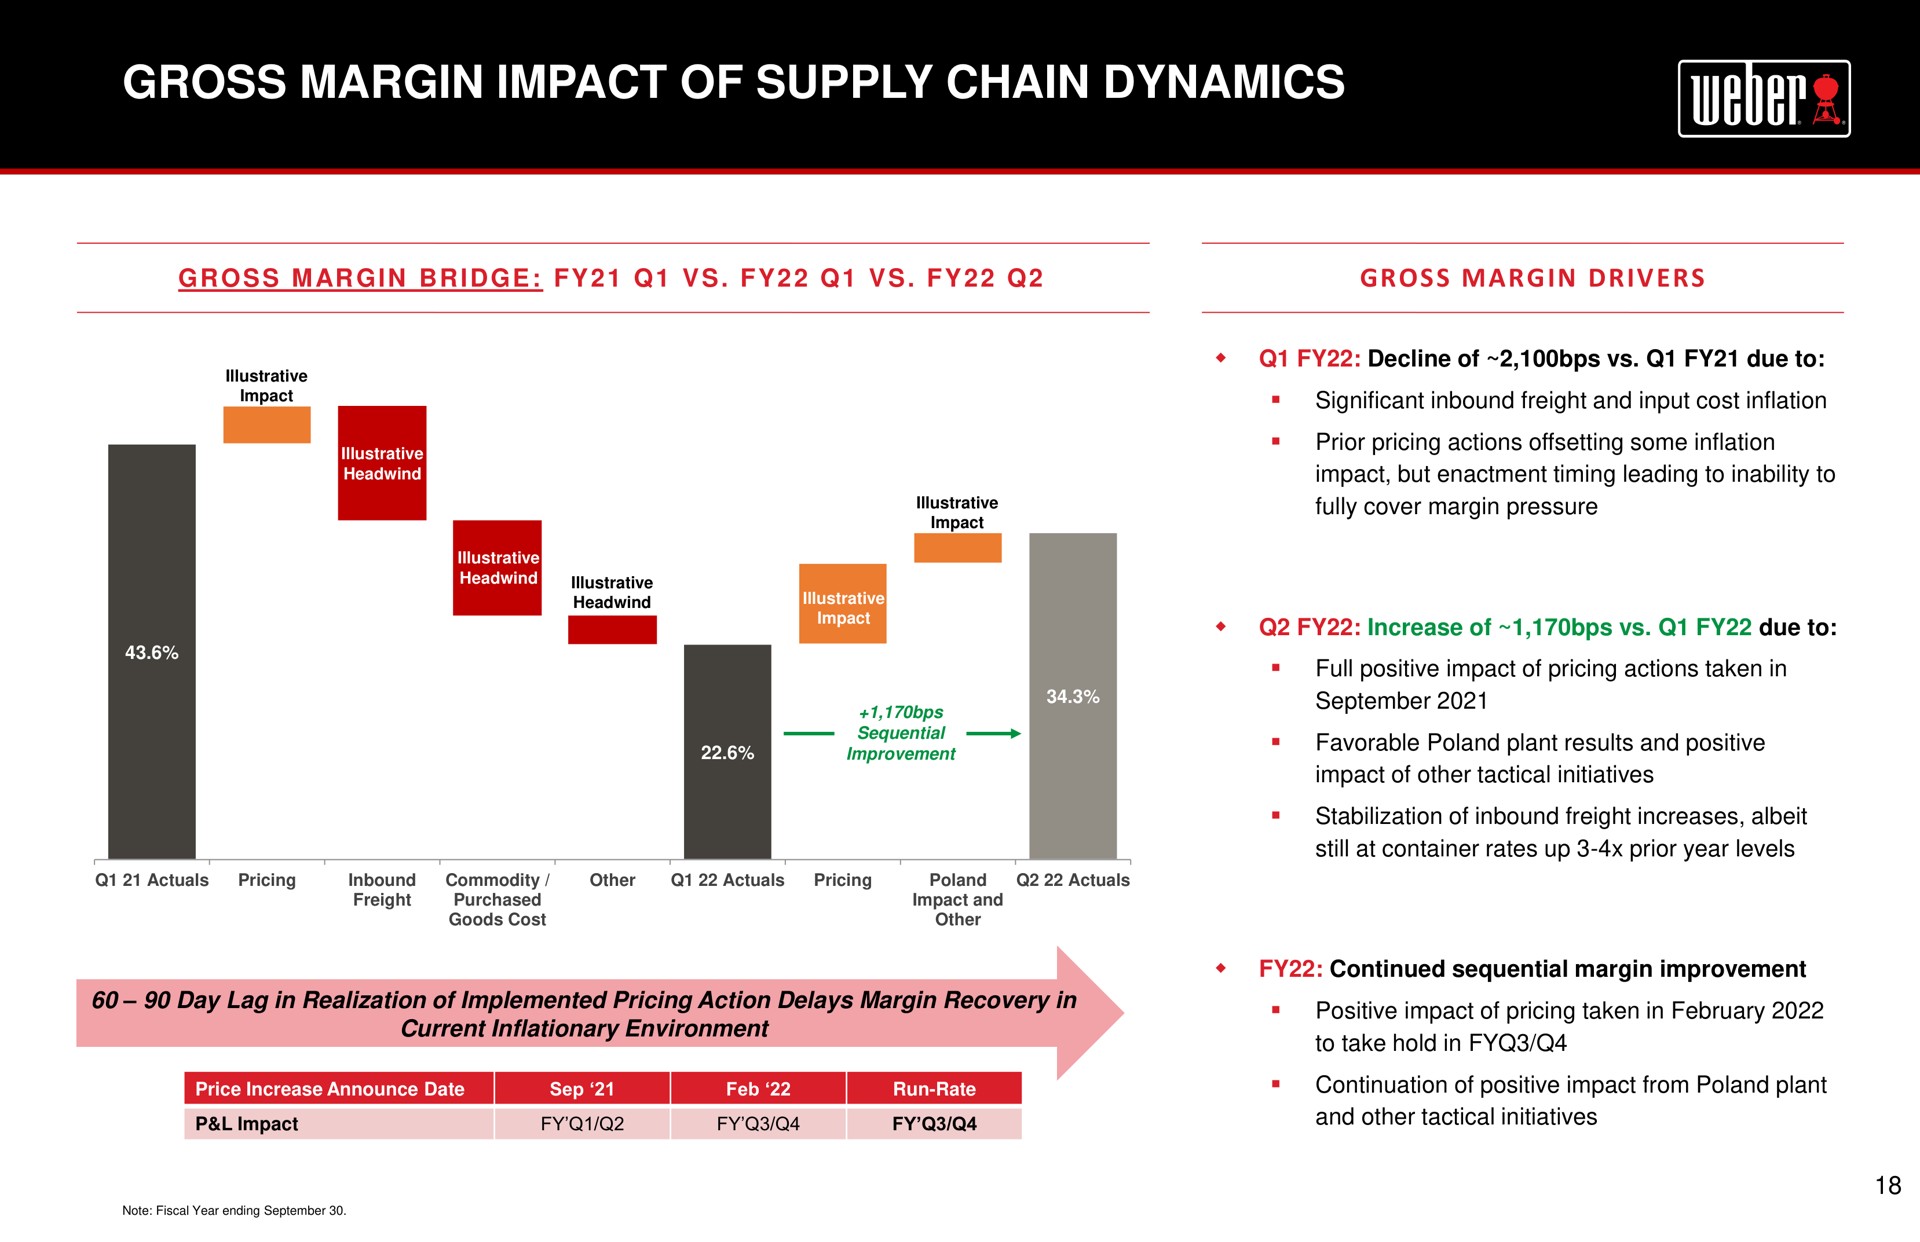 gross margin impact of supply chain dynamics continuation positive from plant | Weber